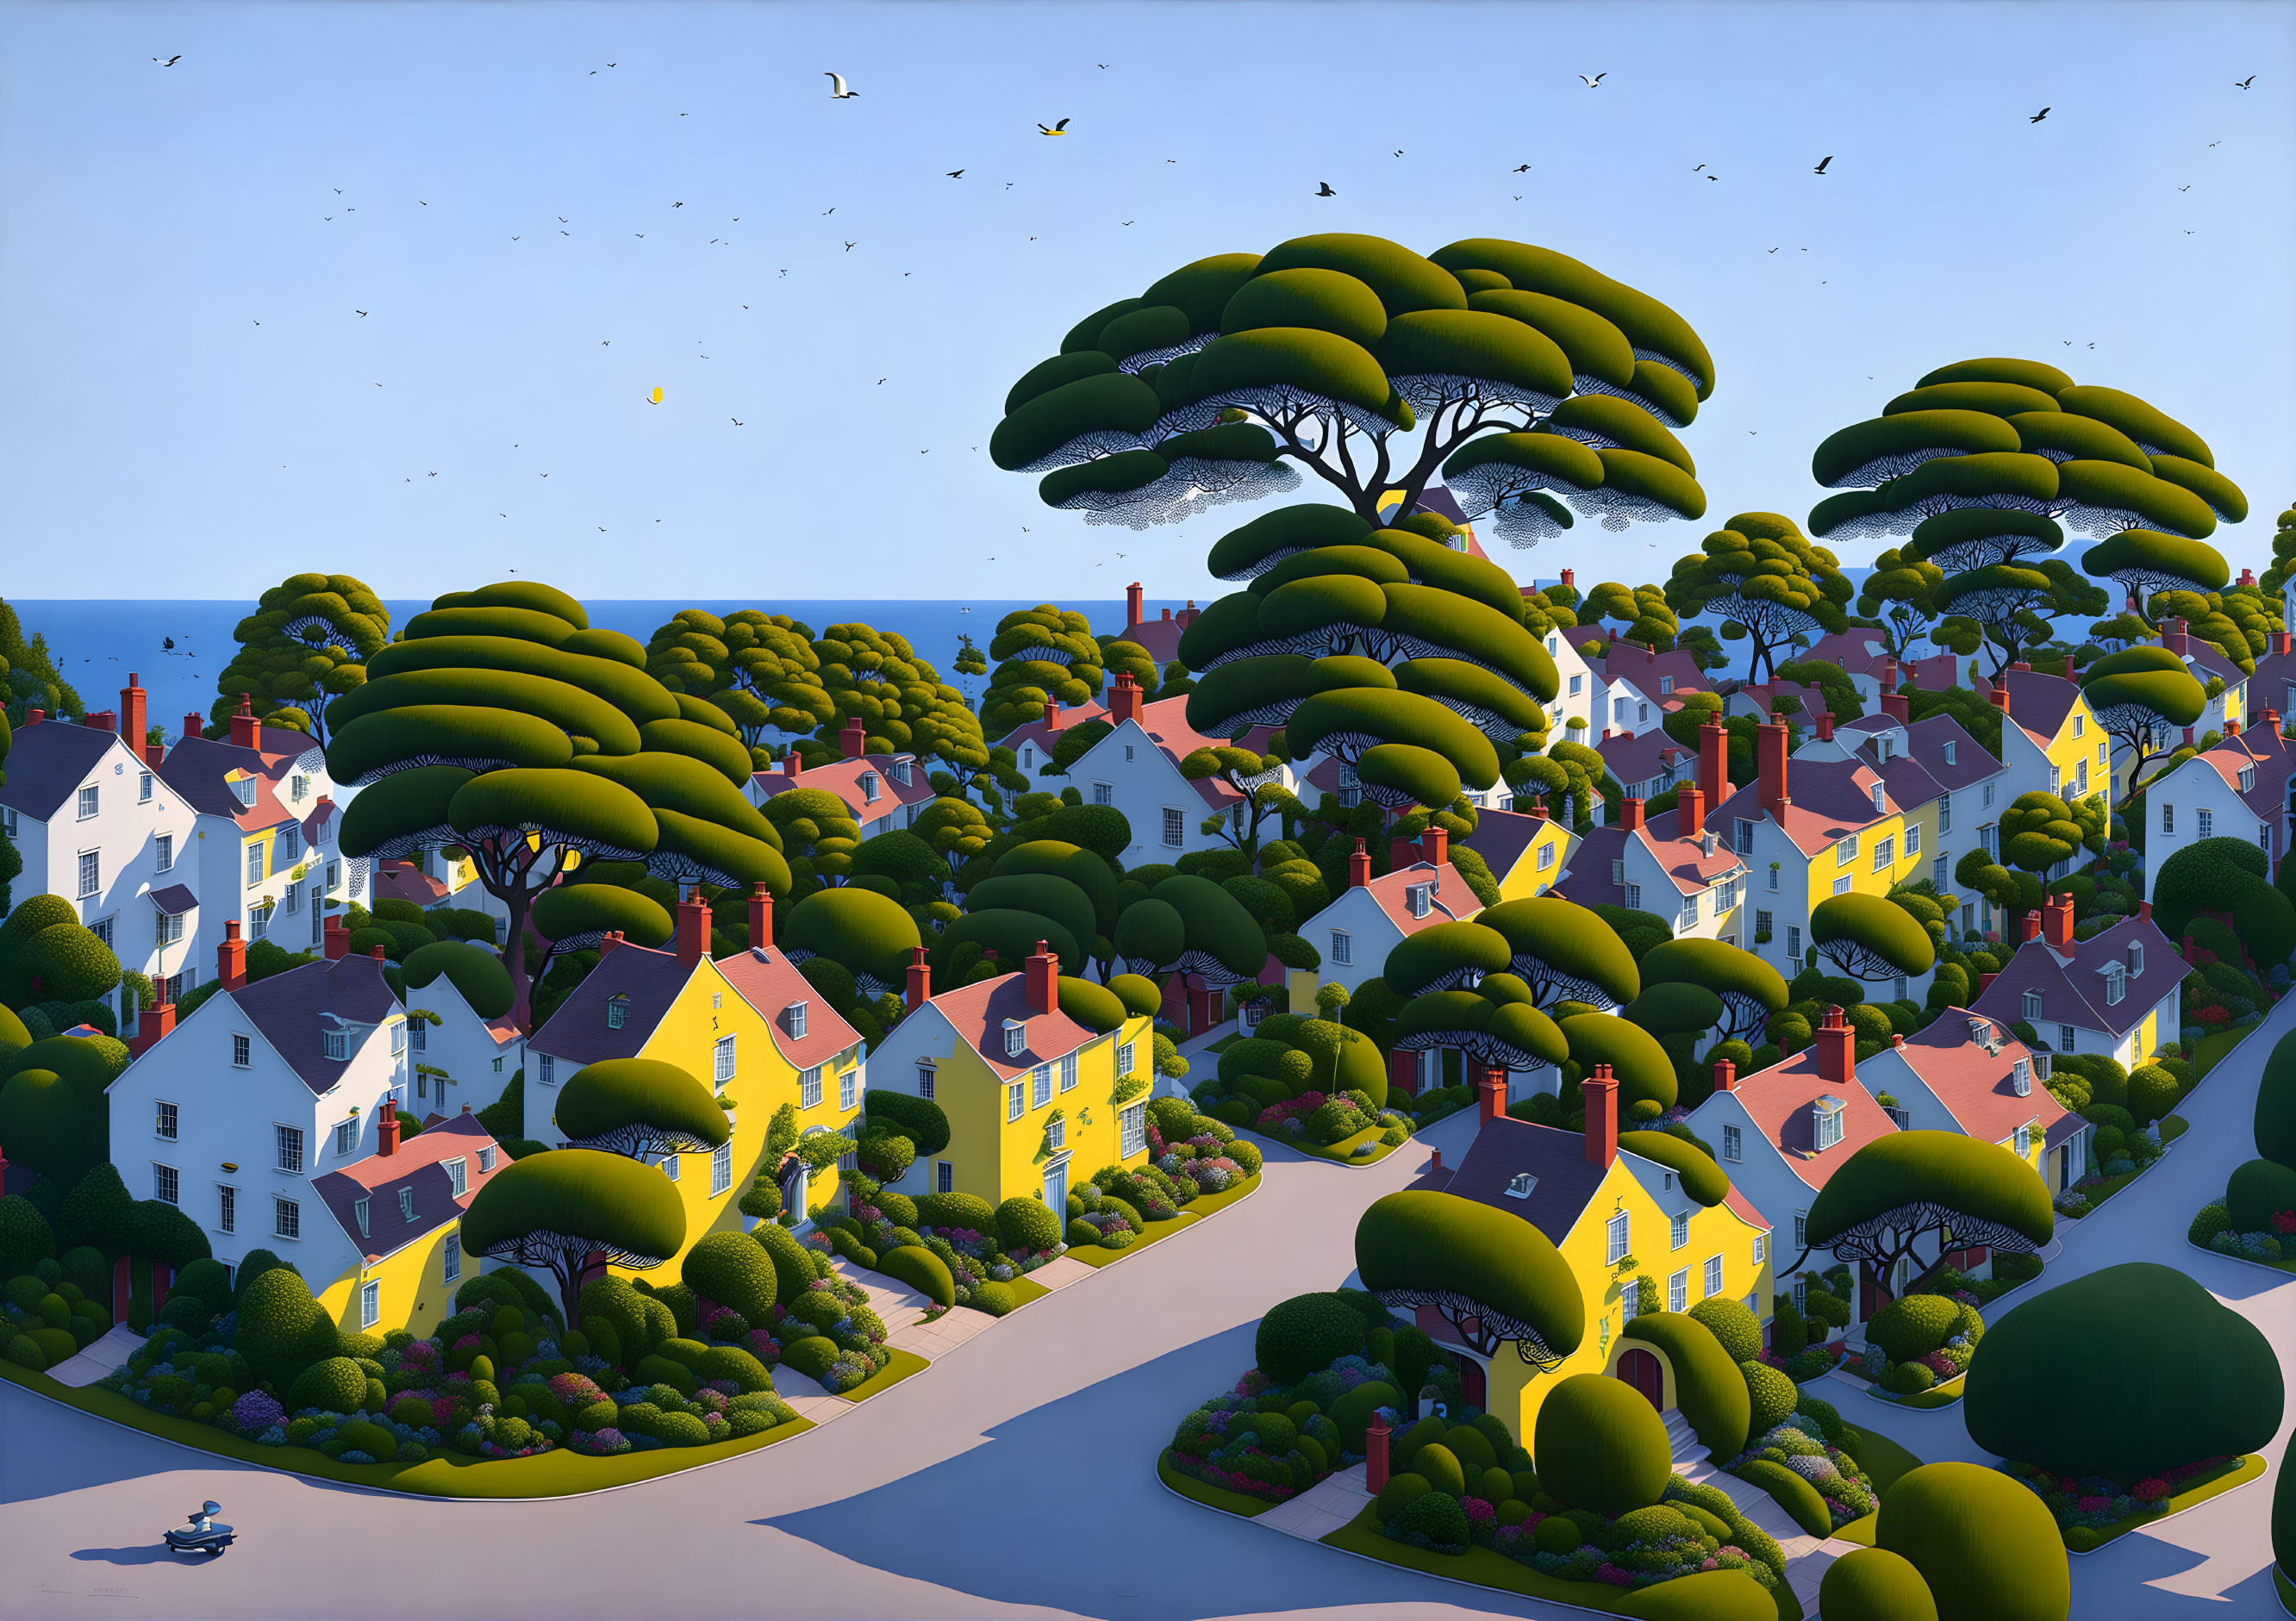 Surreal landscape with oversized treetops and quaint village under blue sky